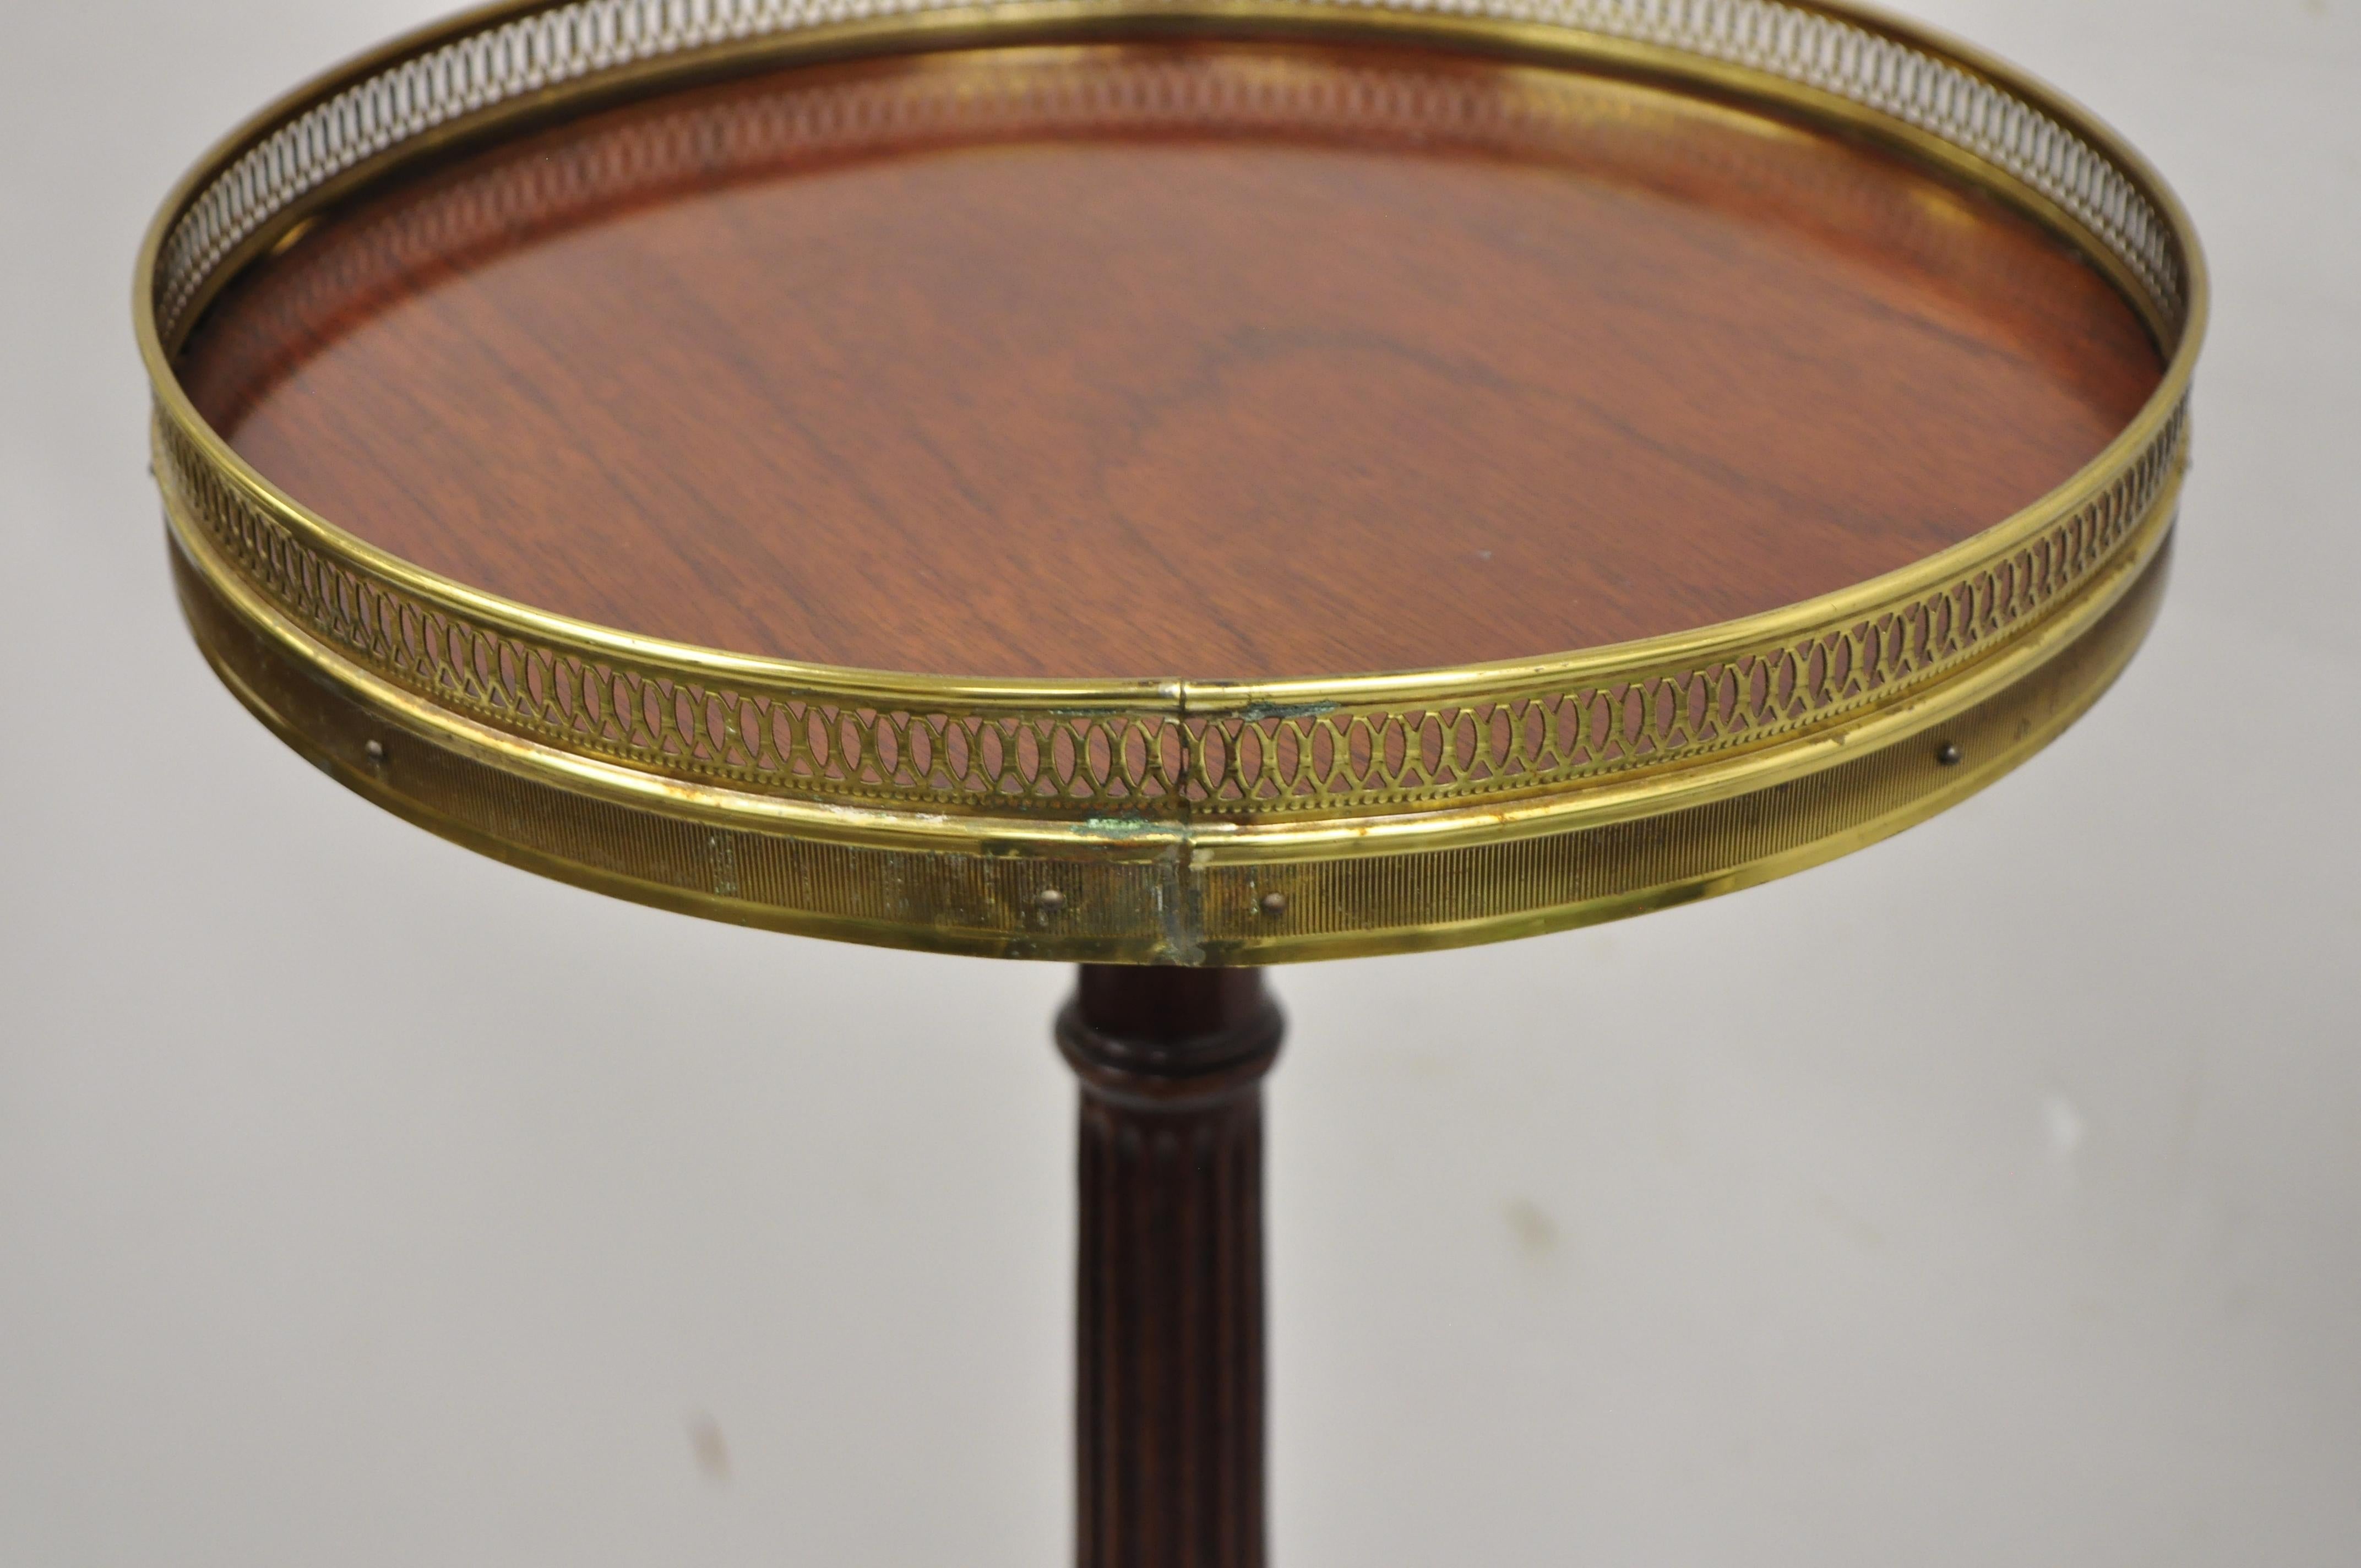 North American Vintage Mahogany Queen Anne Style Tall Pedestal Plant Stand with Brass Gallery